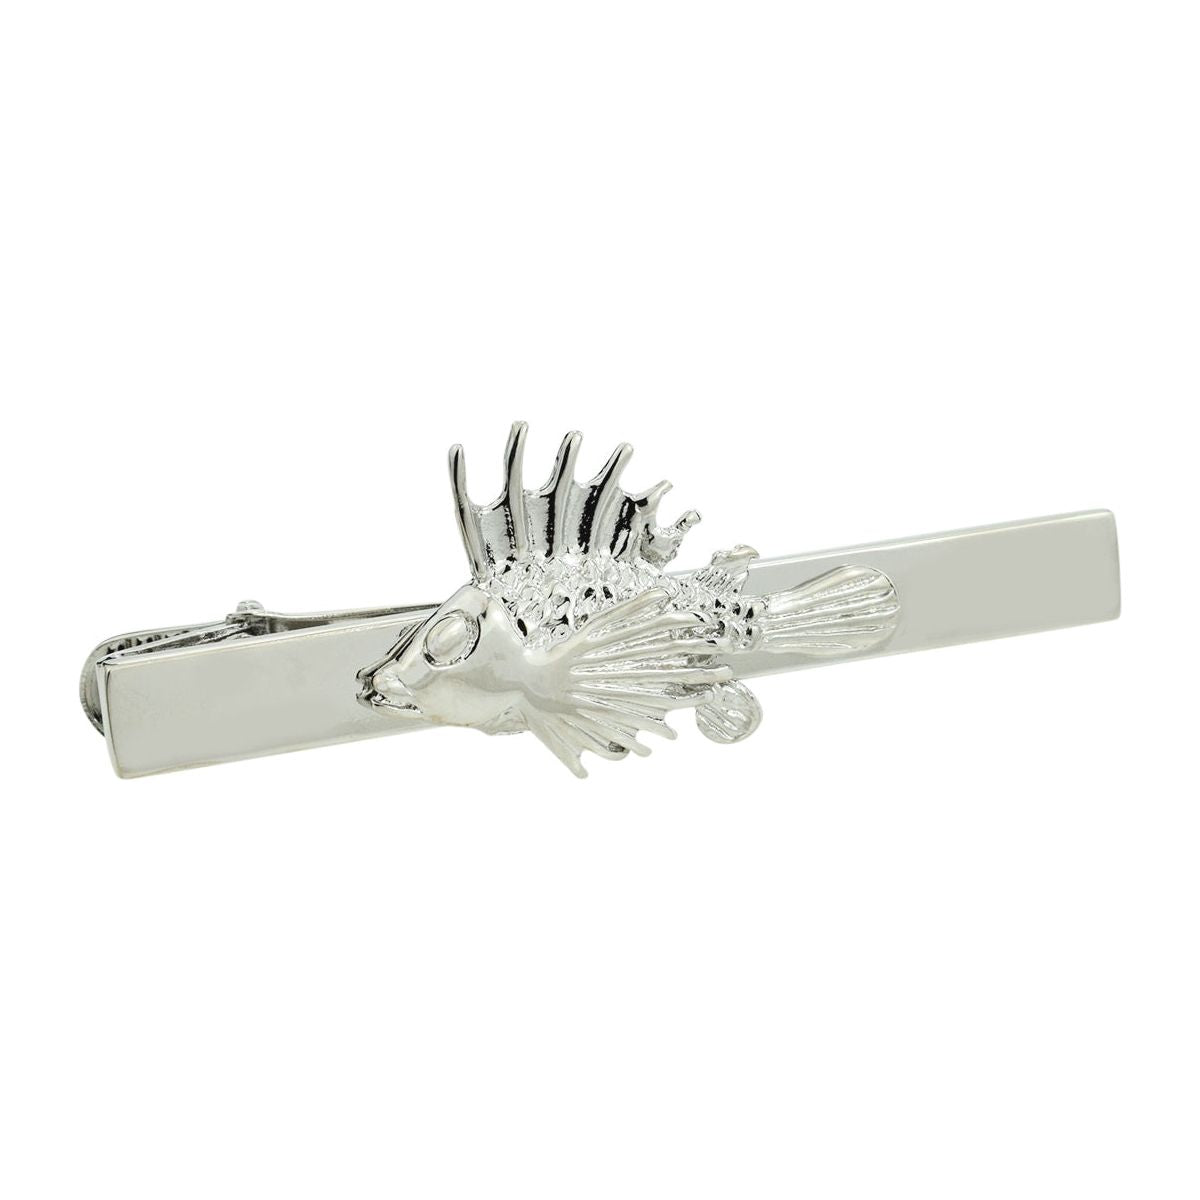 Exotic Spiky Fish Tie Clip - Ashton and Finch